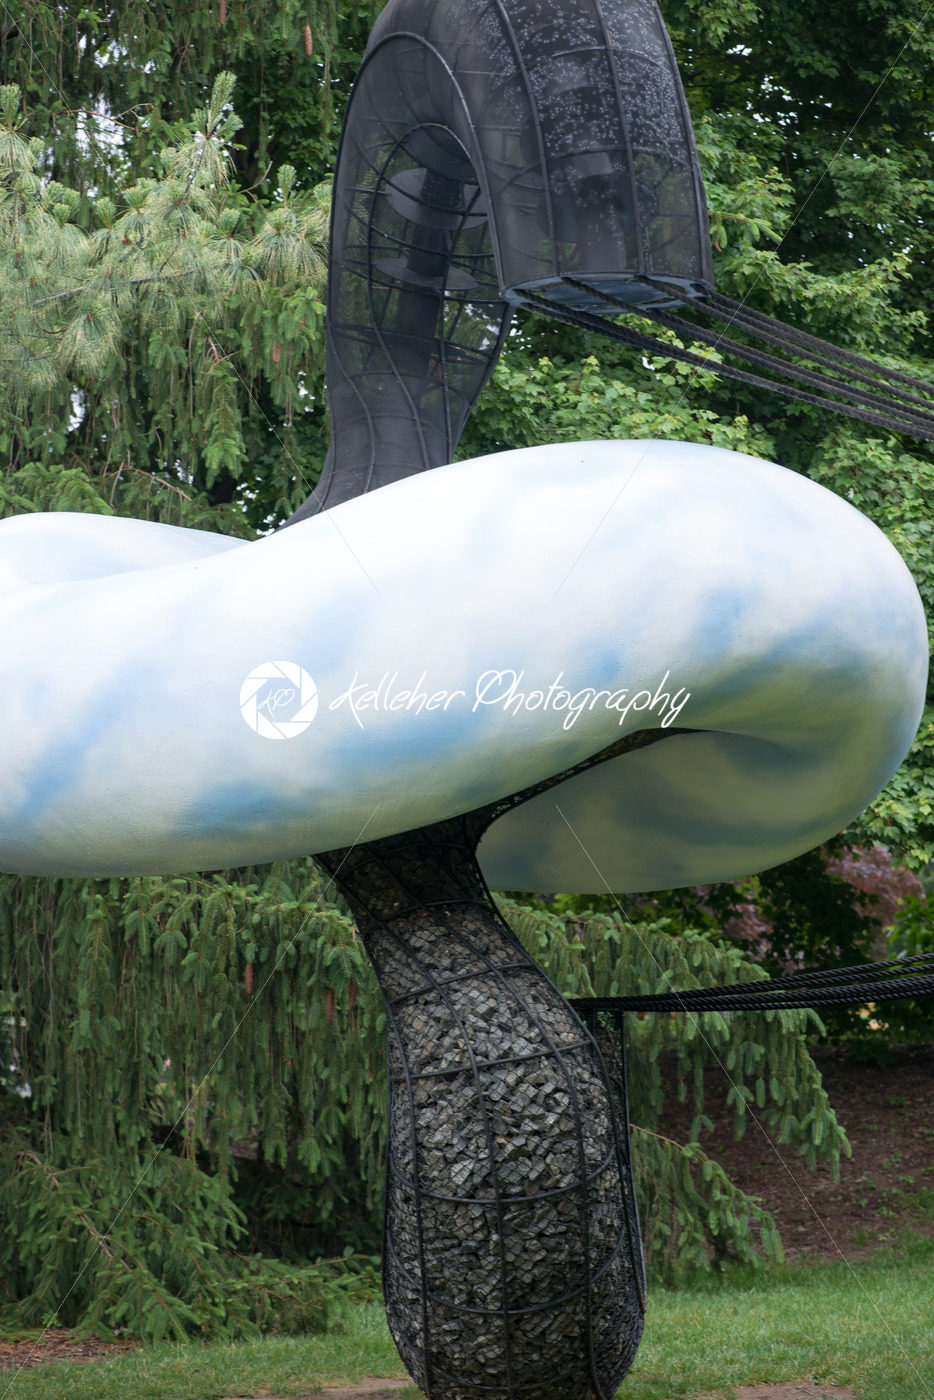 TRENTON, NJ – JUNE 17, 2017: Founded in 1992 by American artist Seward Johnson, Grounds for Sculpture is an outdoor sculpture park - Kelleher Photography Store